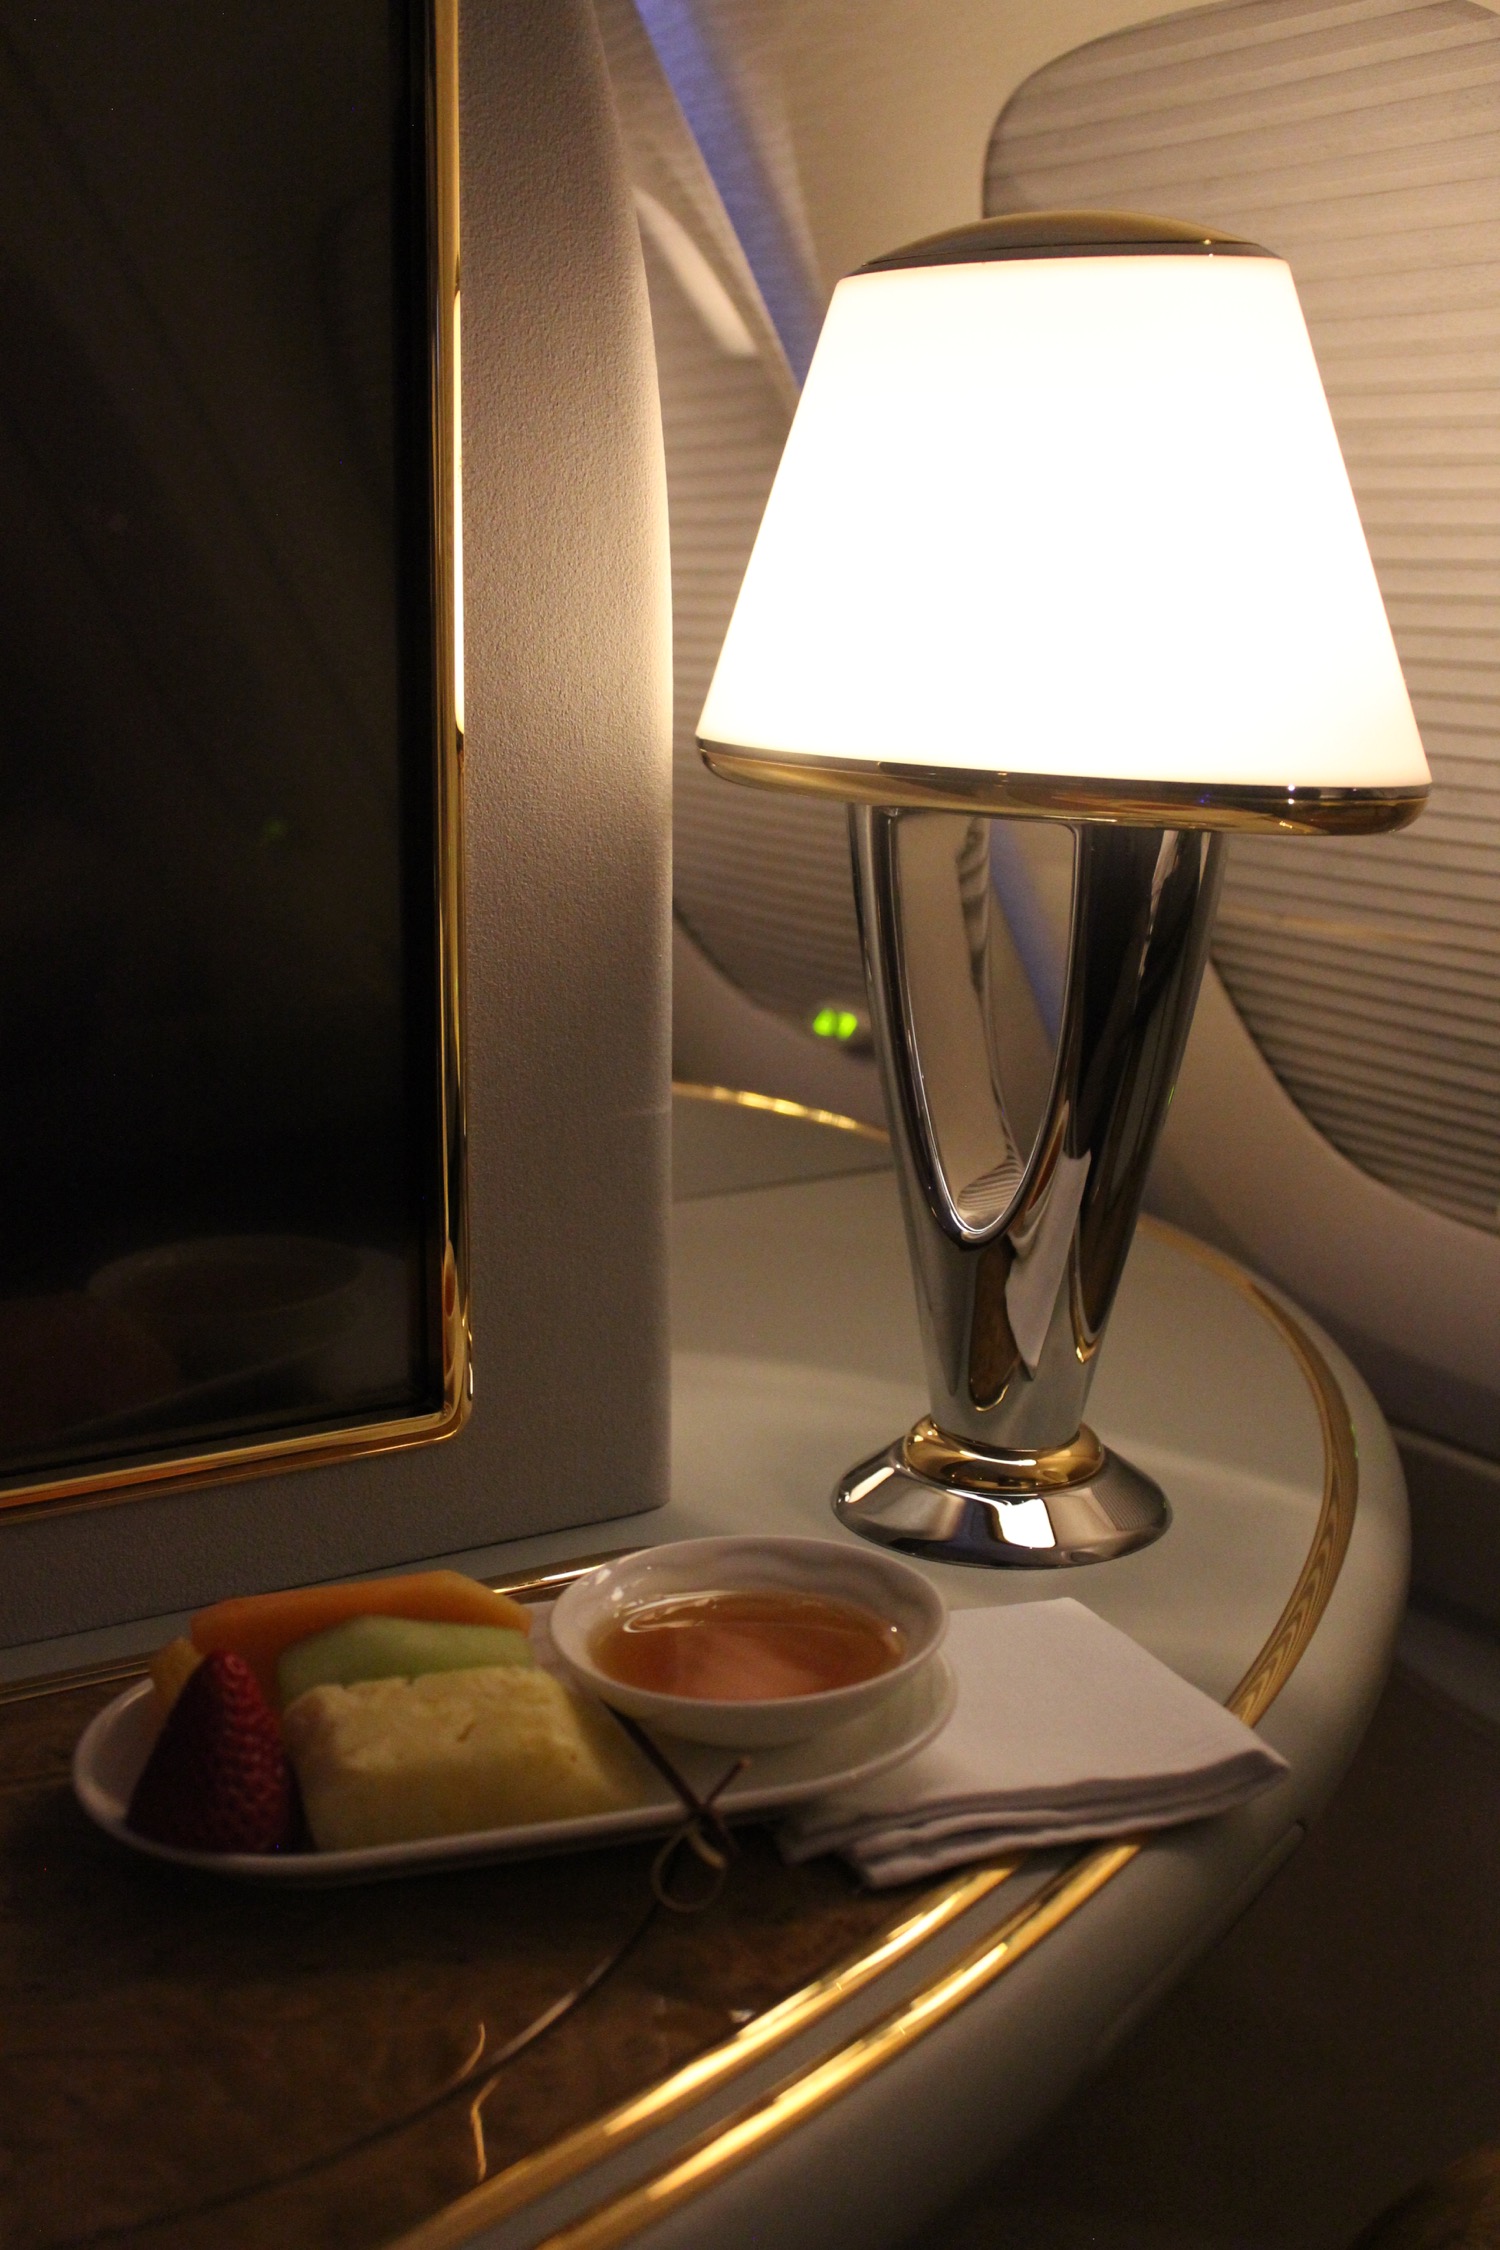 a lamp on a table next to a plate of food